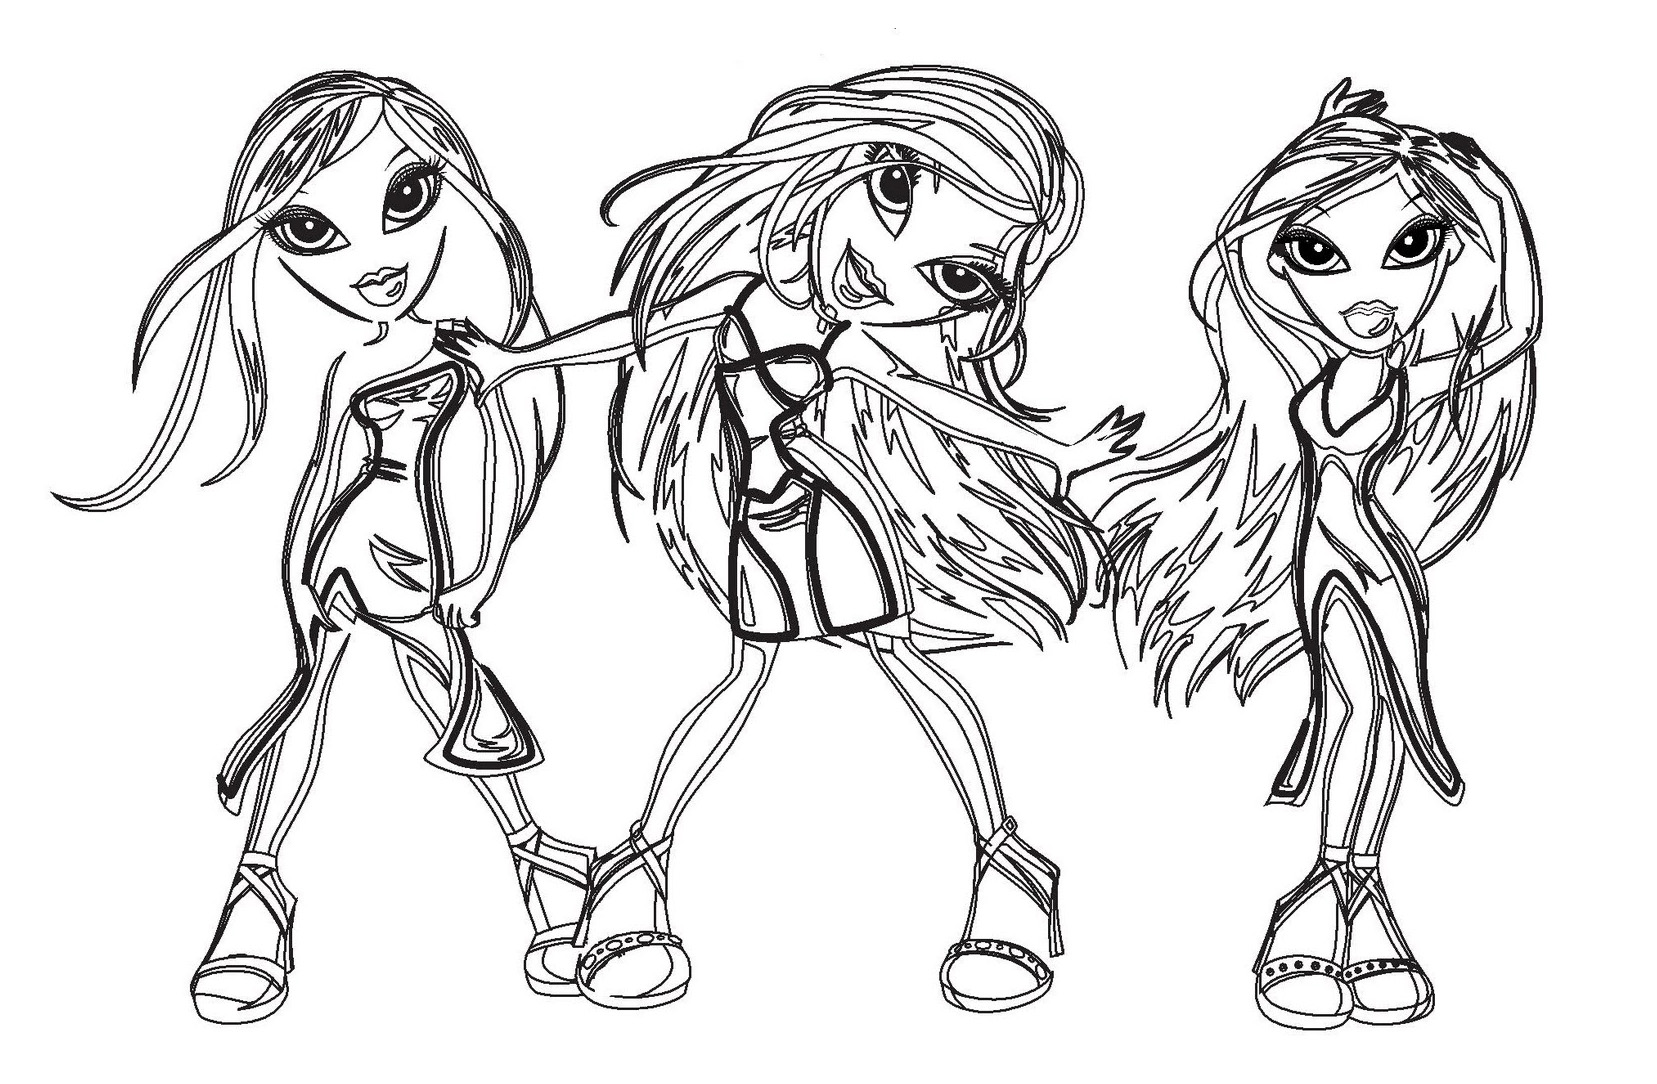 Bratz coloring to download for free